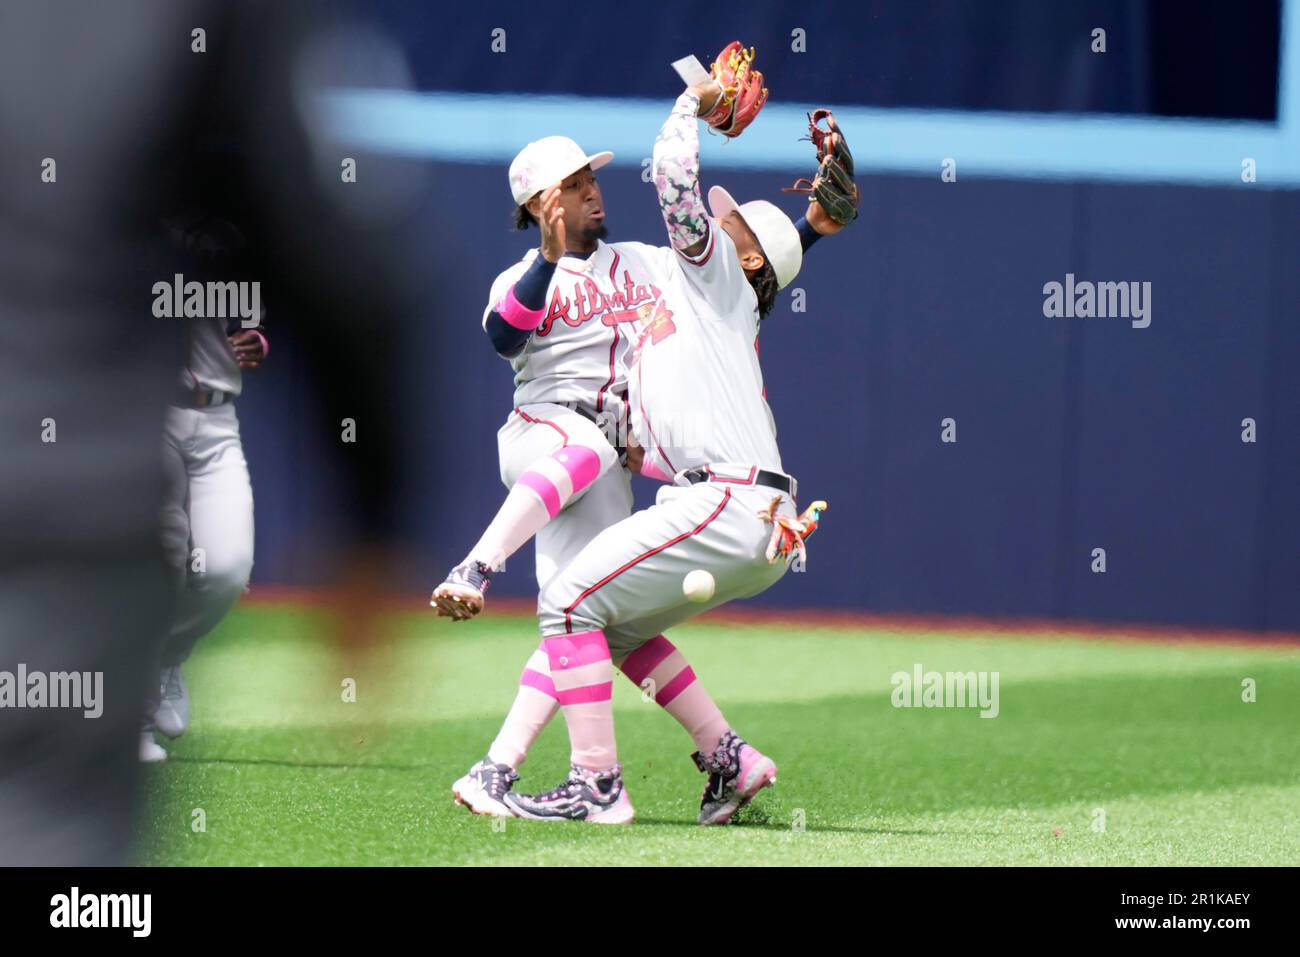 Toronto, Canada. 14th May, 2023. May 14, 2023, Toronto, ON, Canada: Atlanta  Braves second baseman Ozzie Albies (left) collides with right-fielder  Ronald Acuna Jr. (13) on a pop fly hit by Toronto